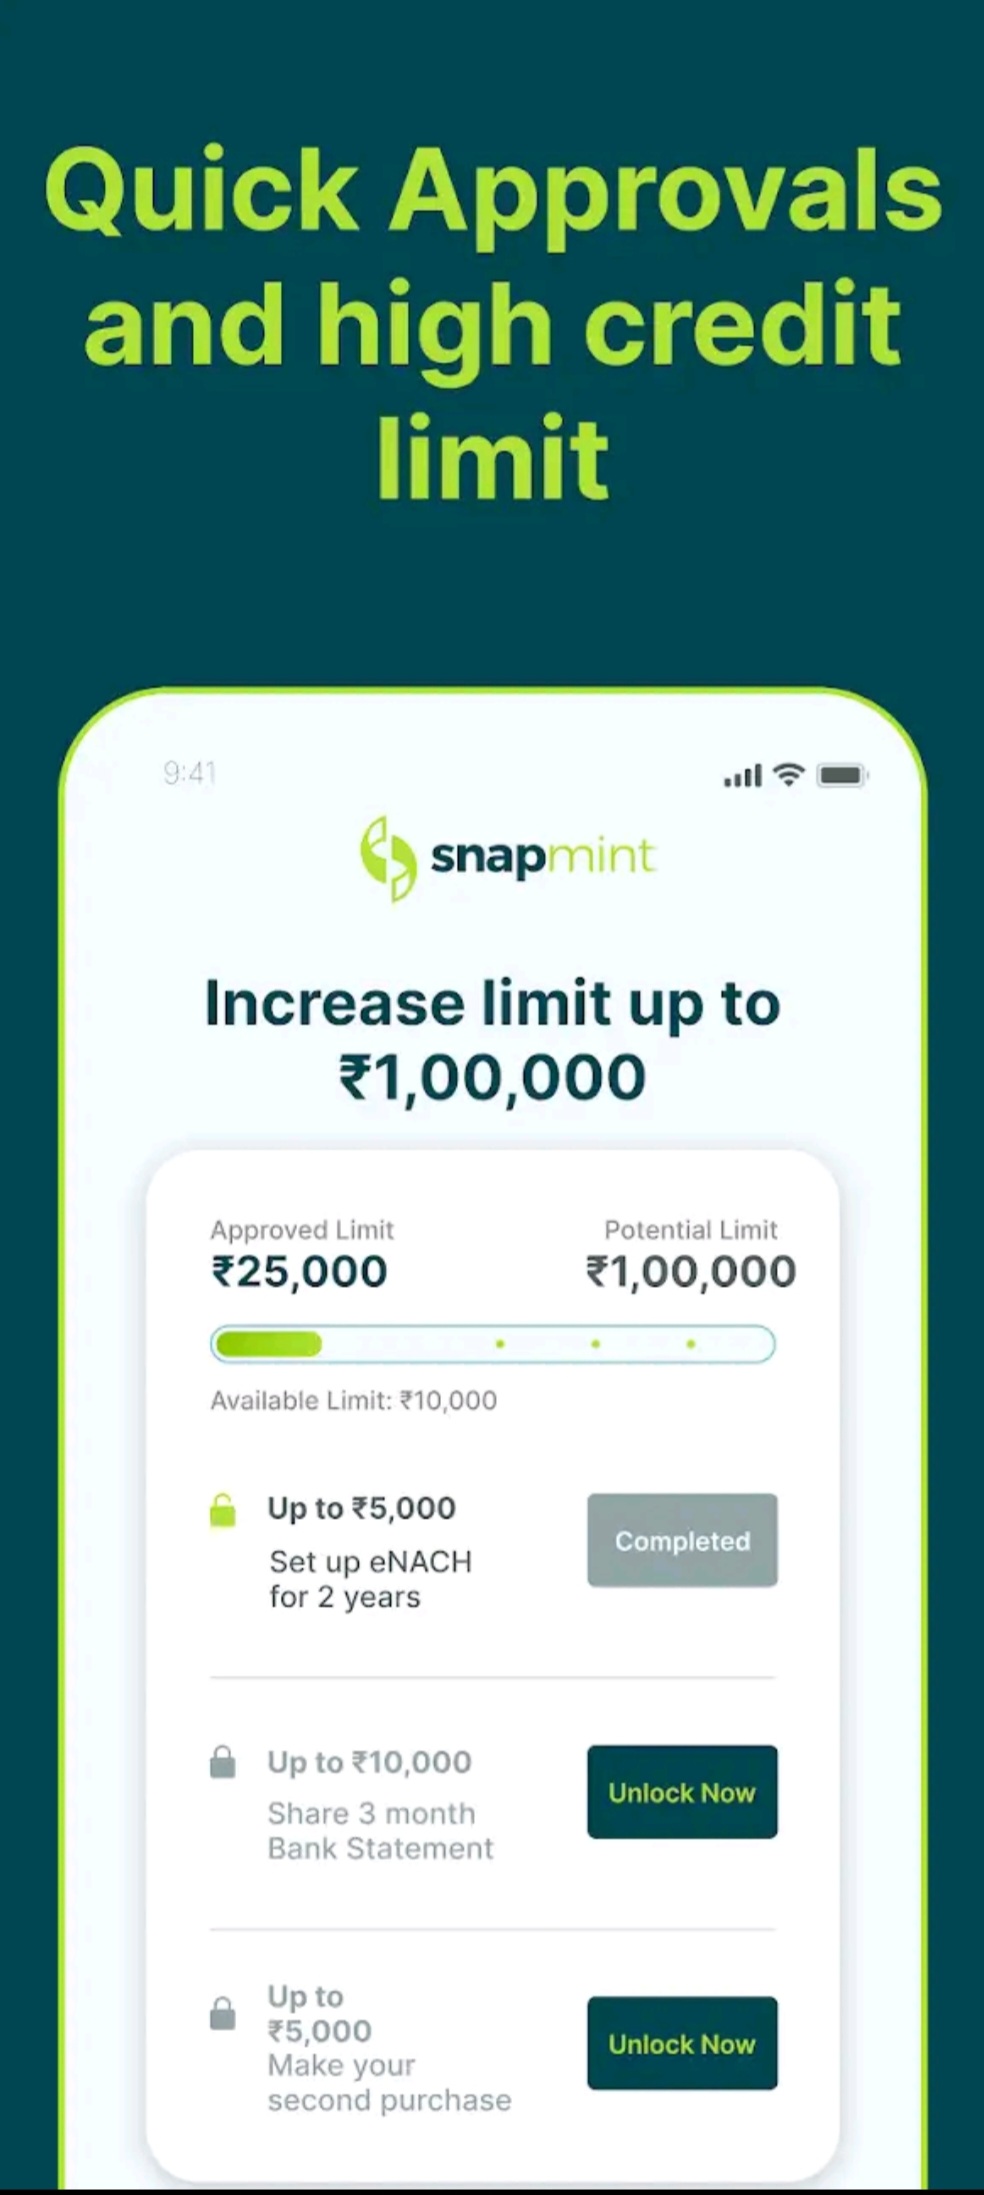 Quick approvals and high credit limit of snapmint app